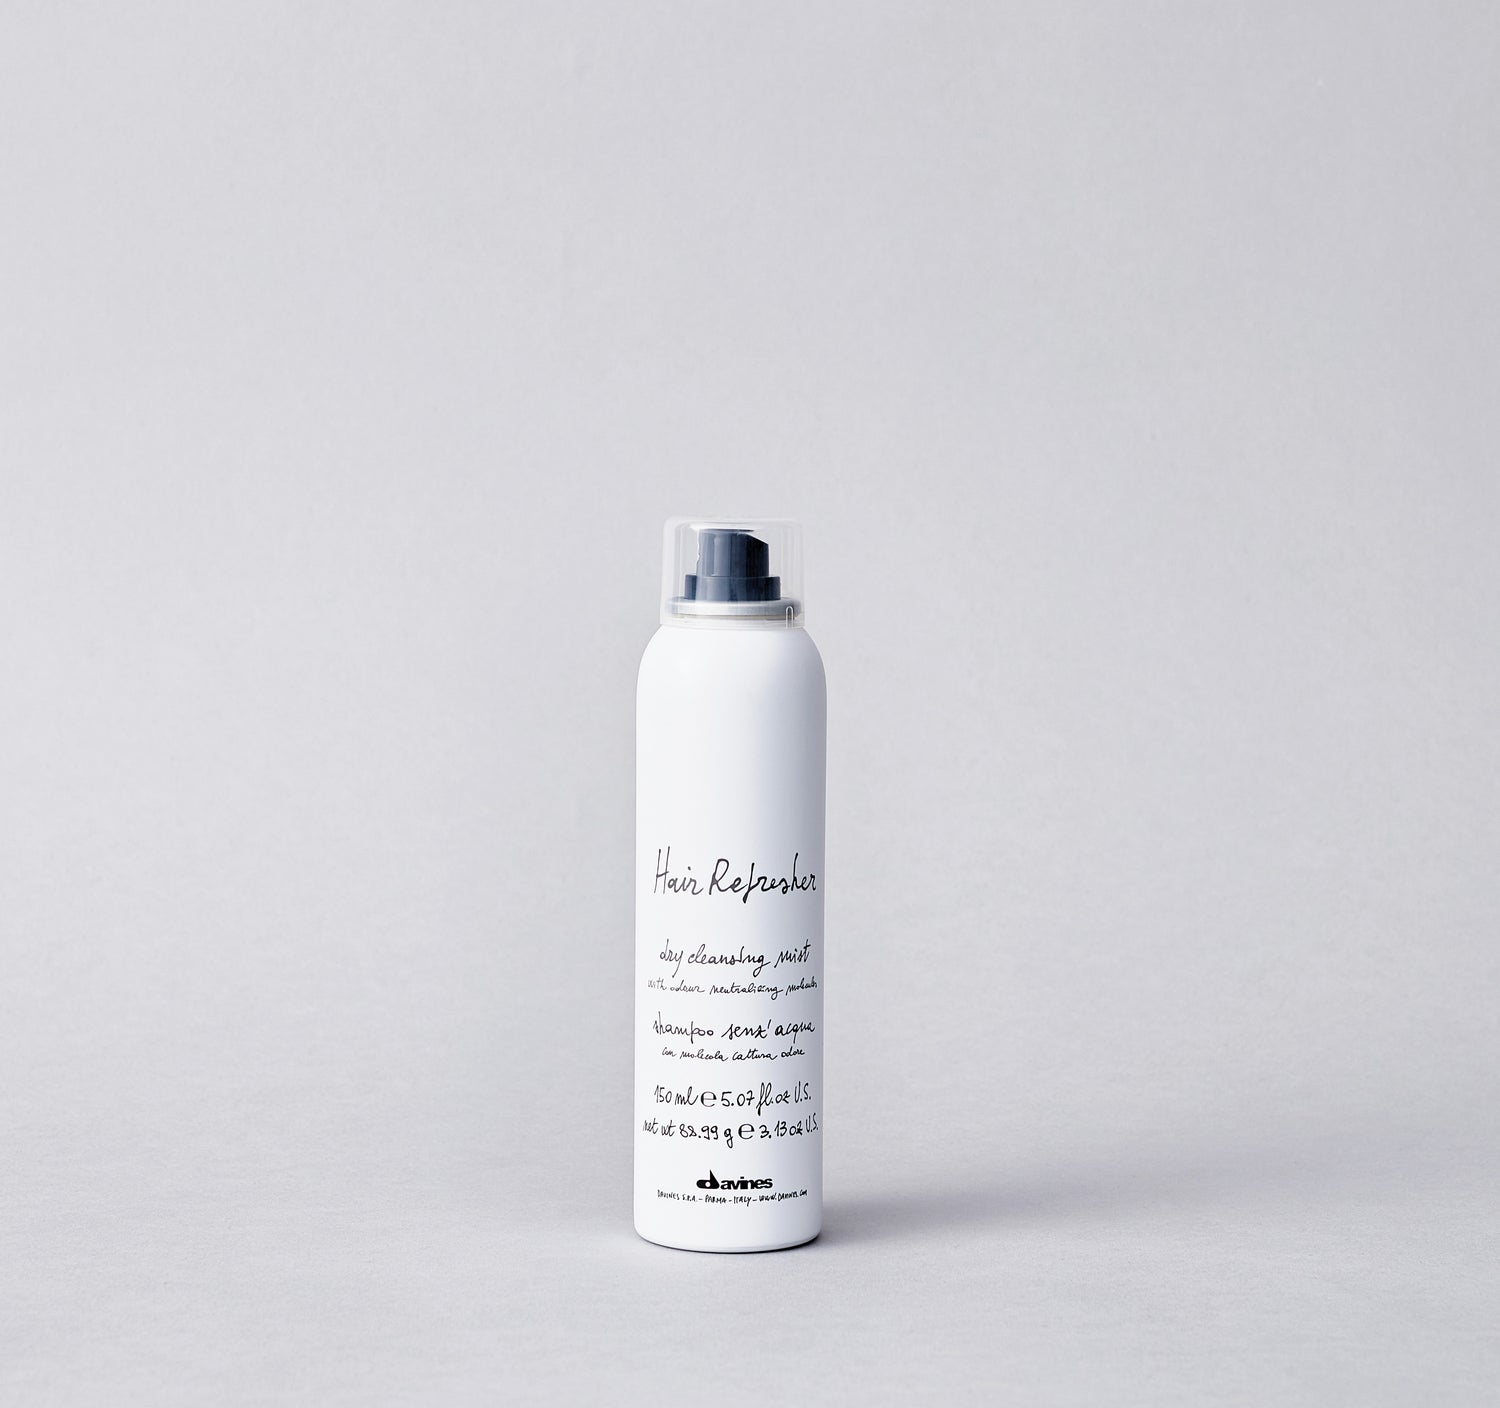 Cleansing dry shampoo spray to refresh and clean hair without using water. This is the perfect dry shampoo for volume as it absorbs excess oil, immediately giving body to the hair so that it looks full and airy.